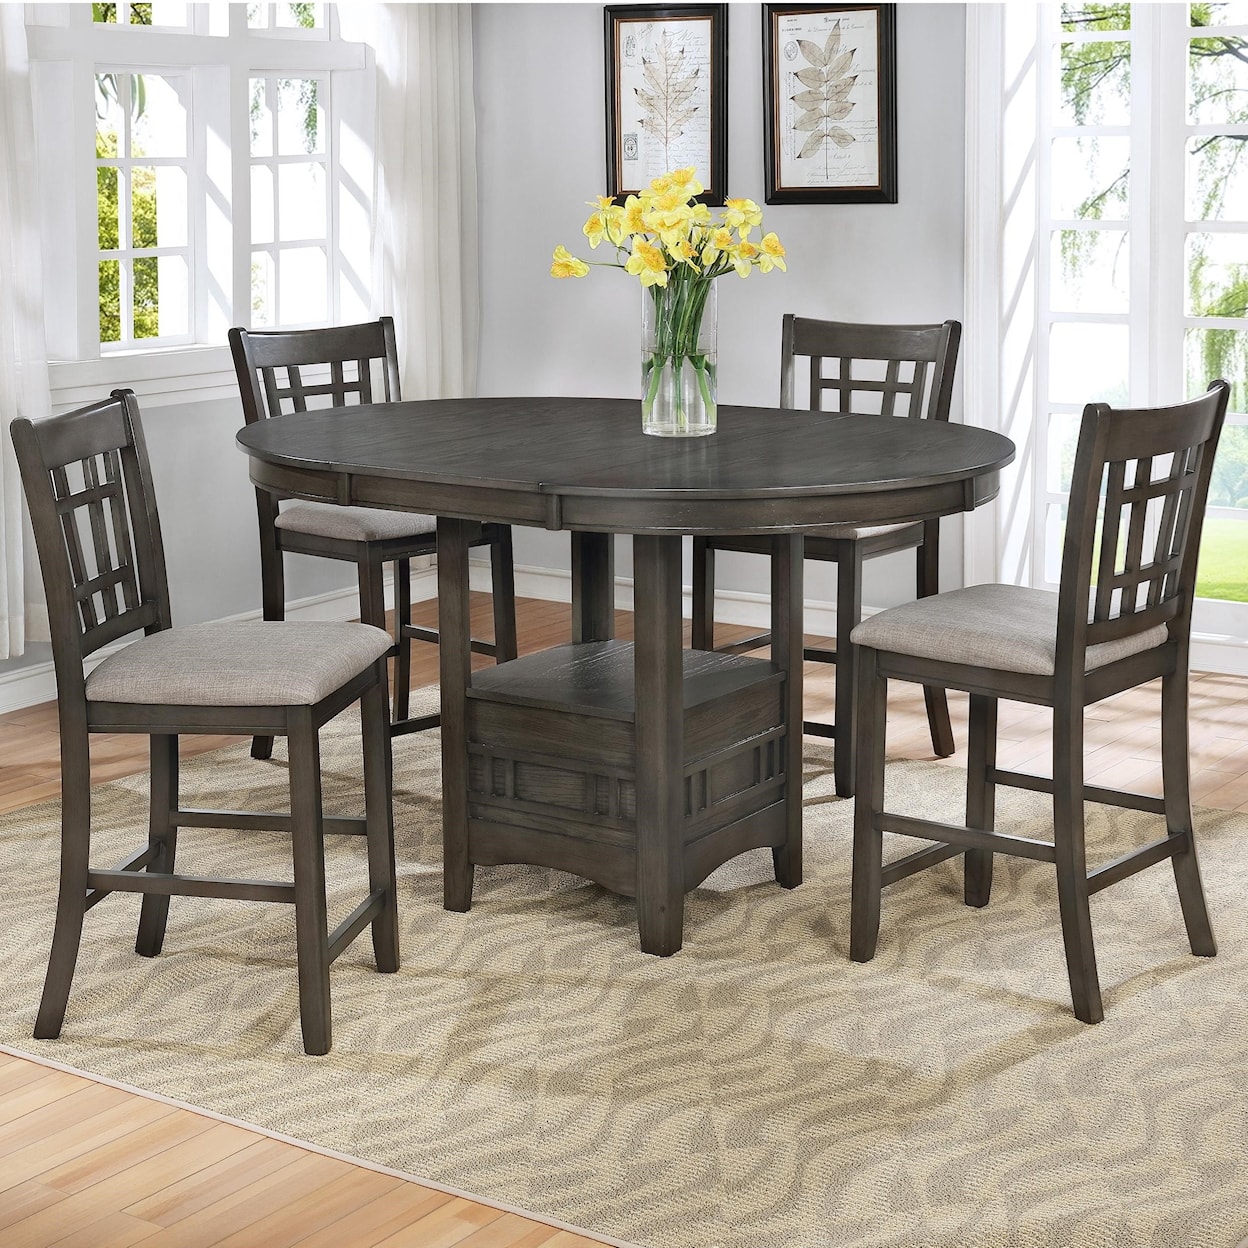 Crown Mark Hartwell 5pc Dining Room Group